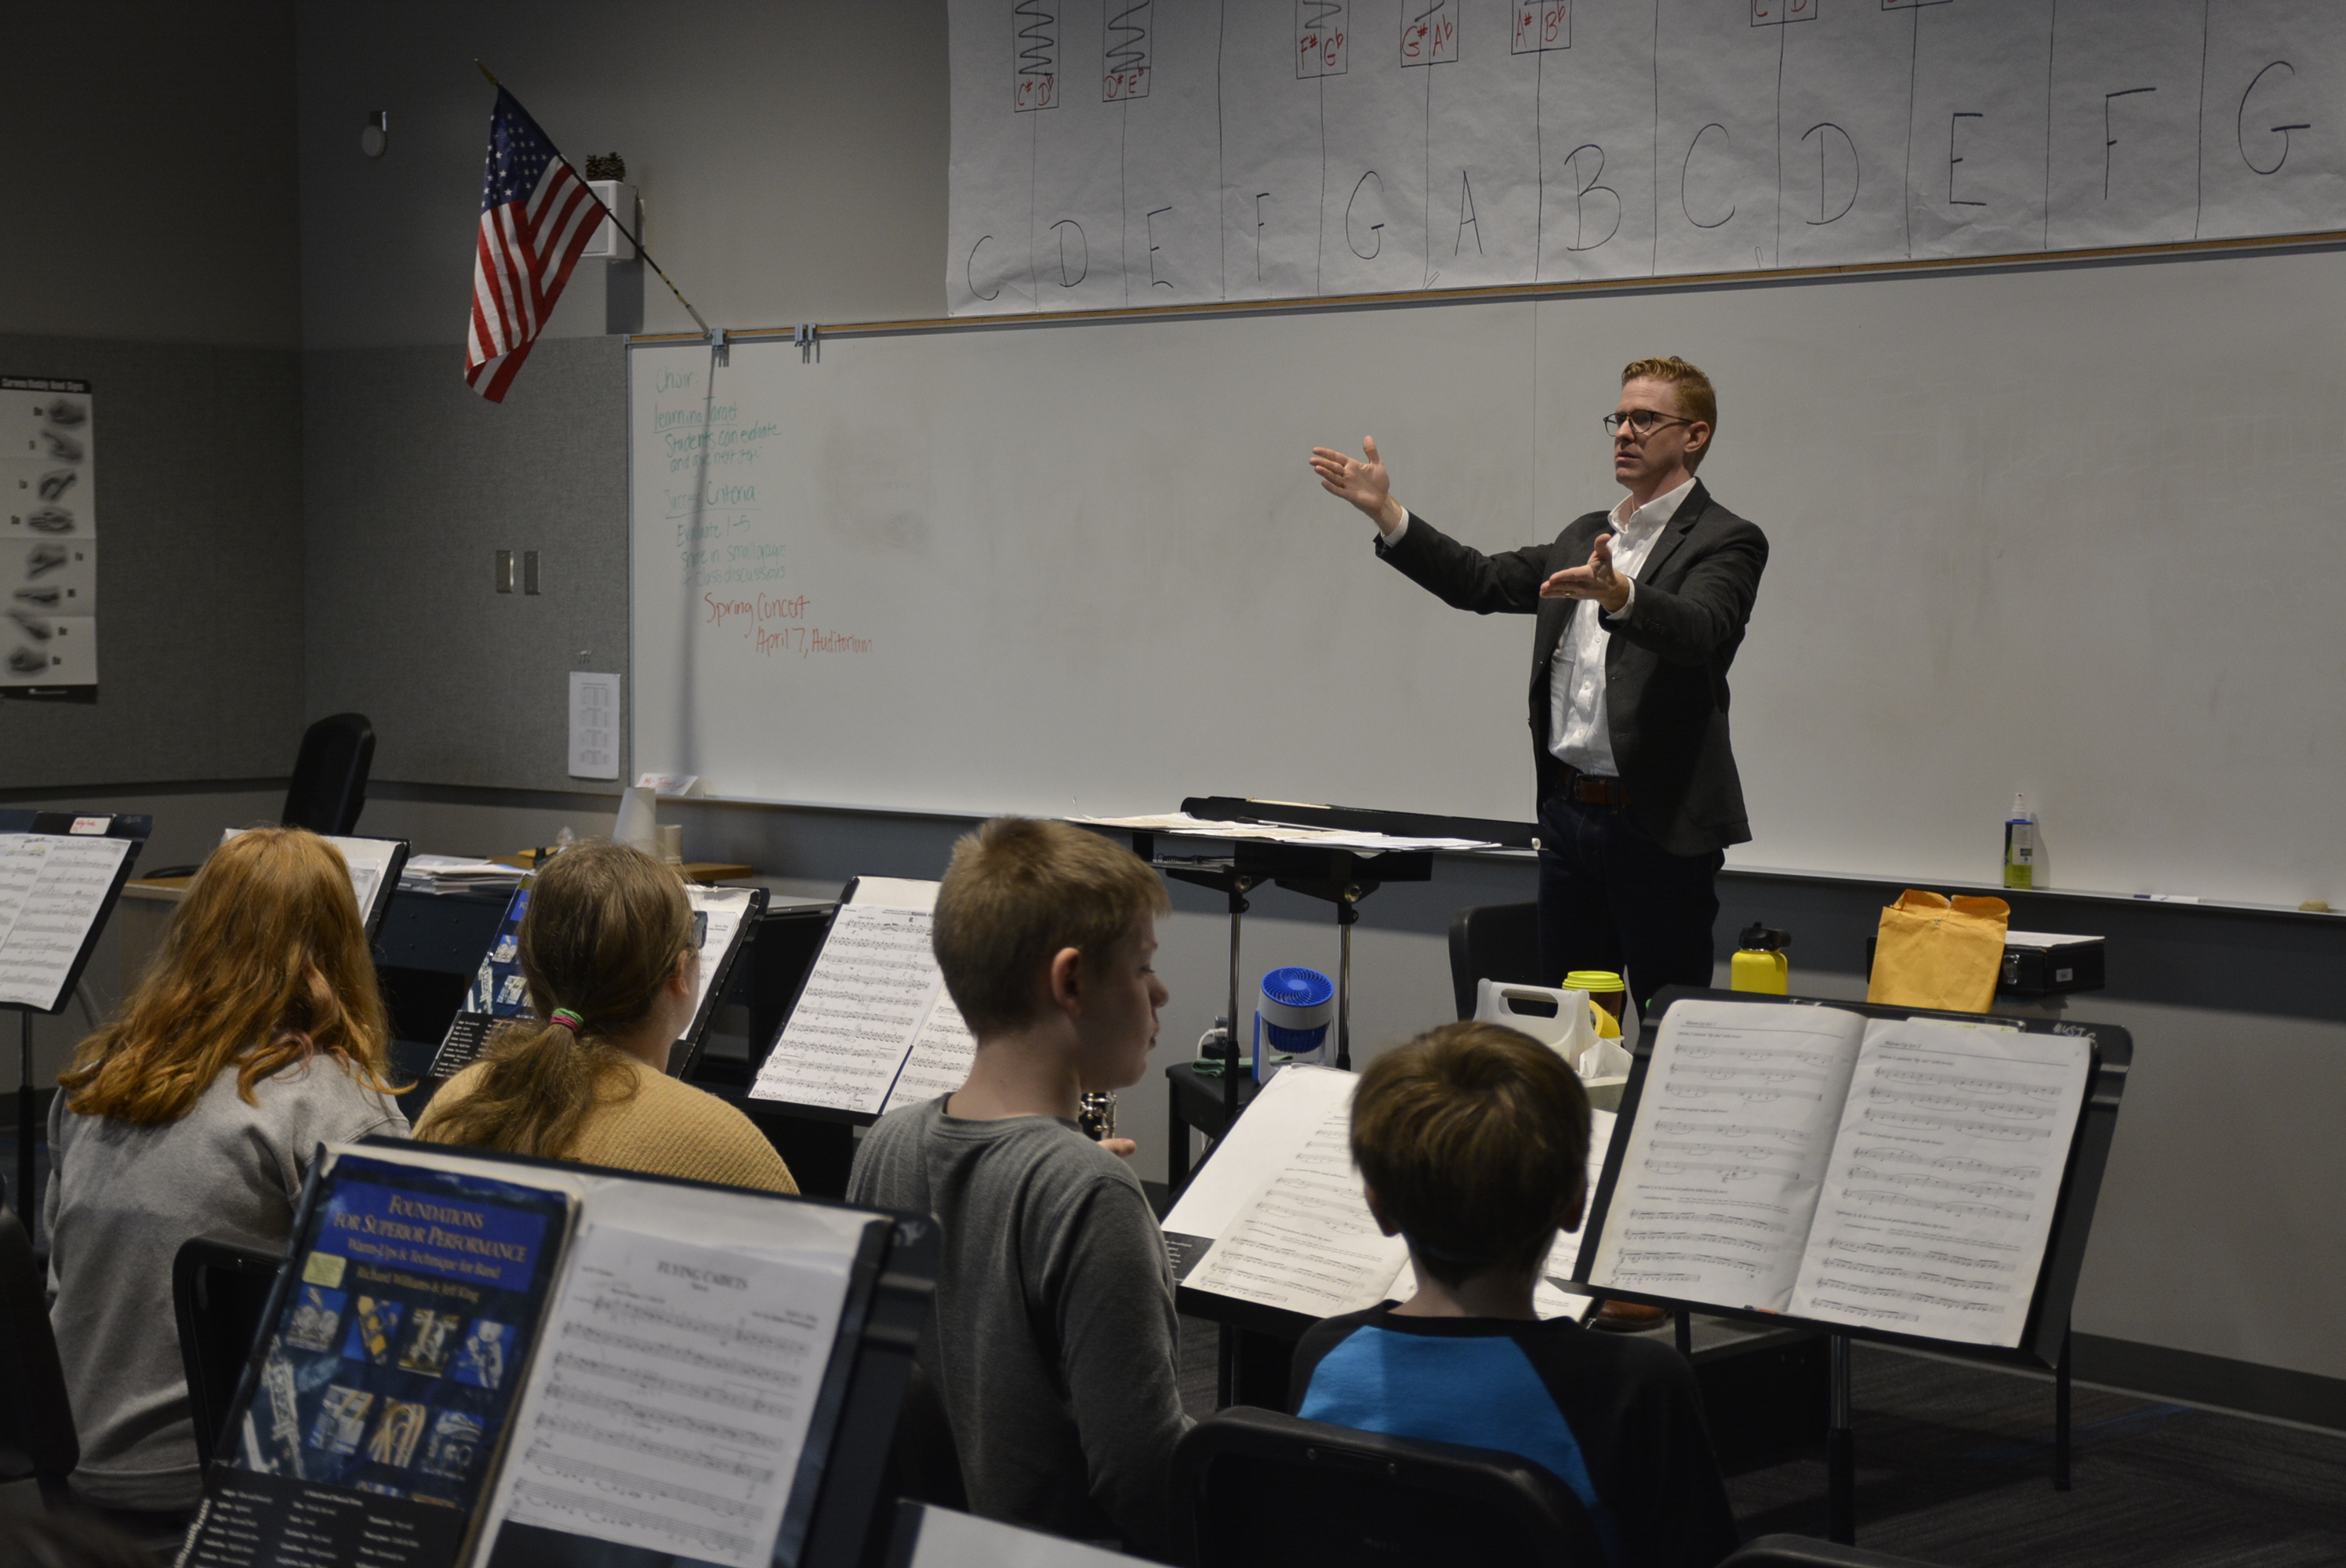 Guest conductor working with students in the JMS band, with students looking at sheet music on stands